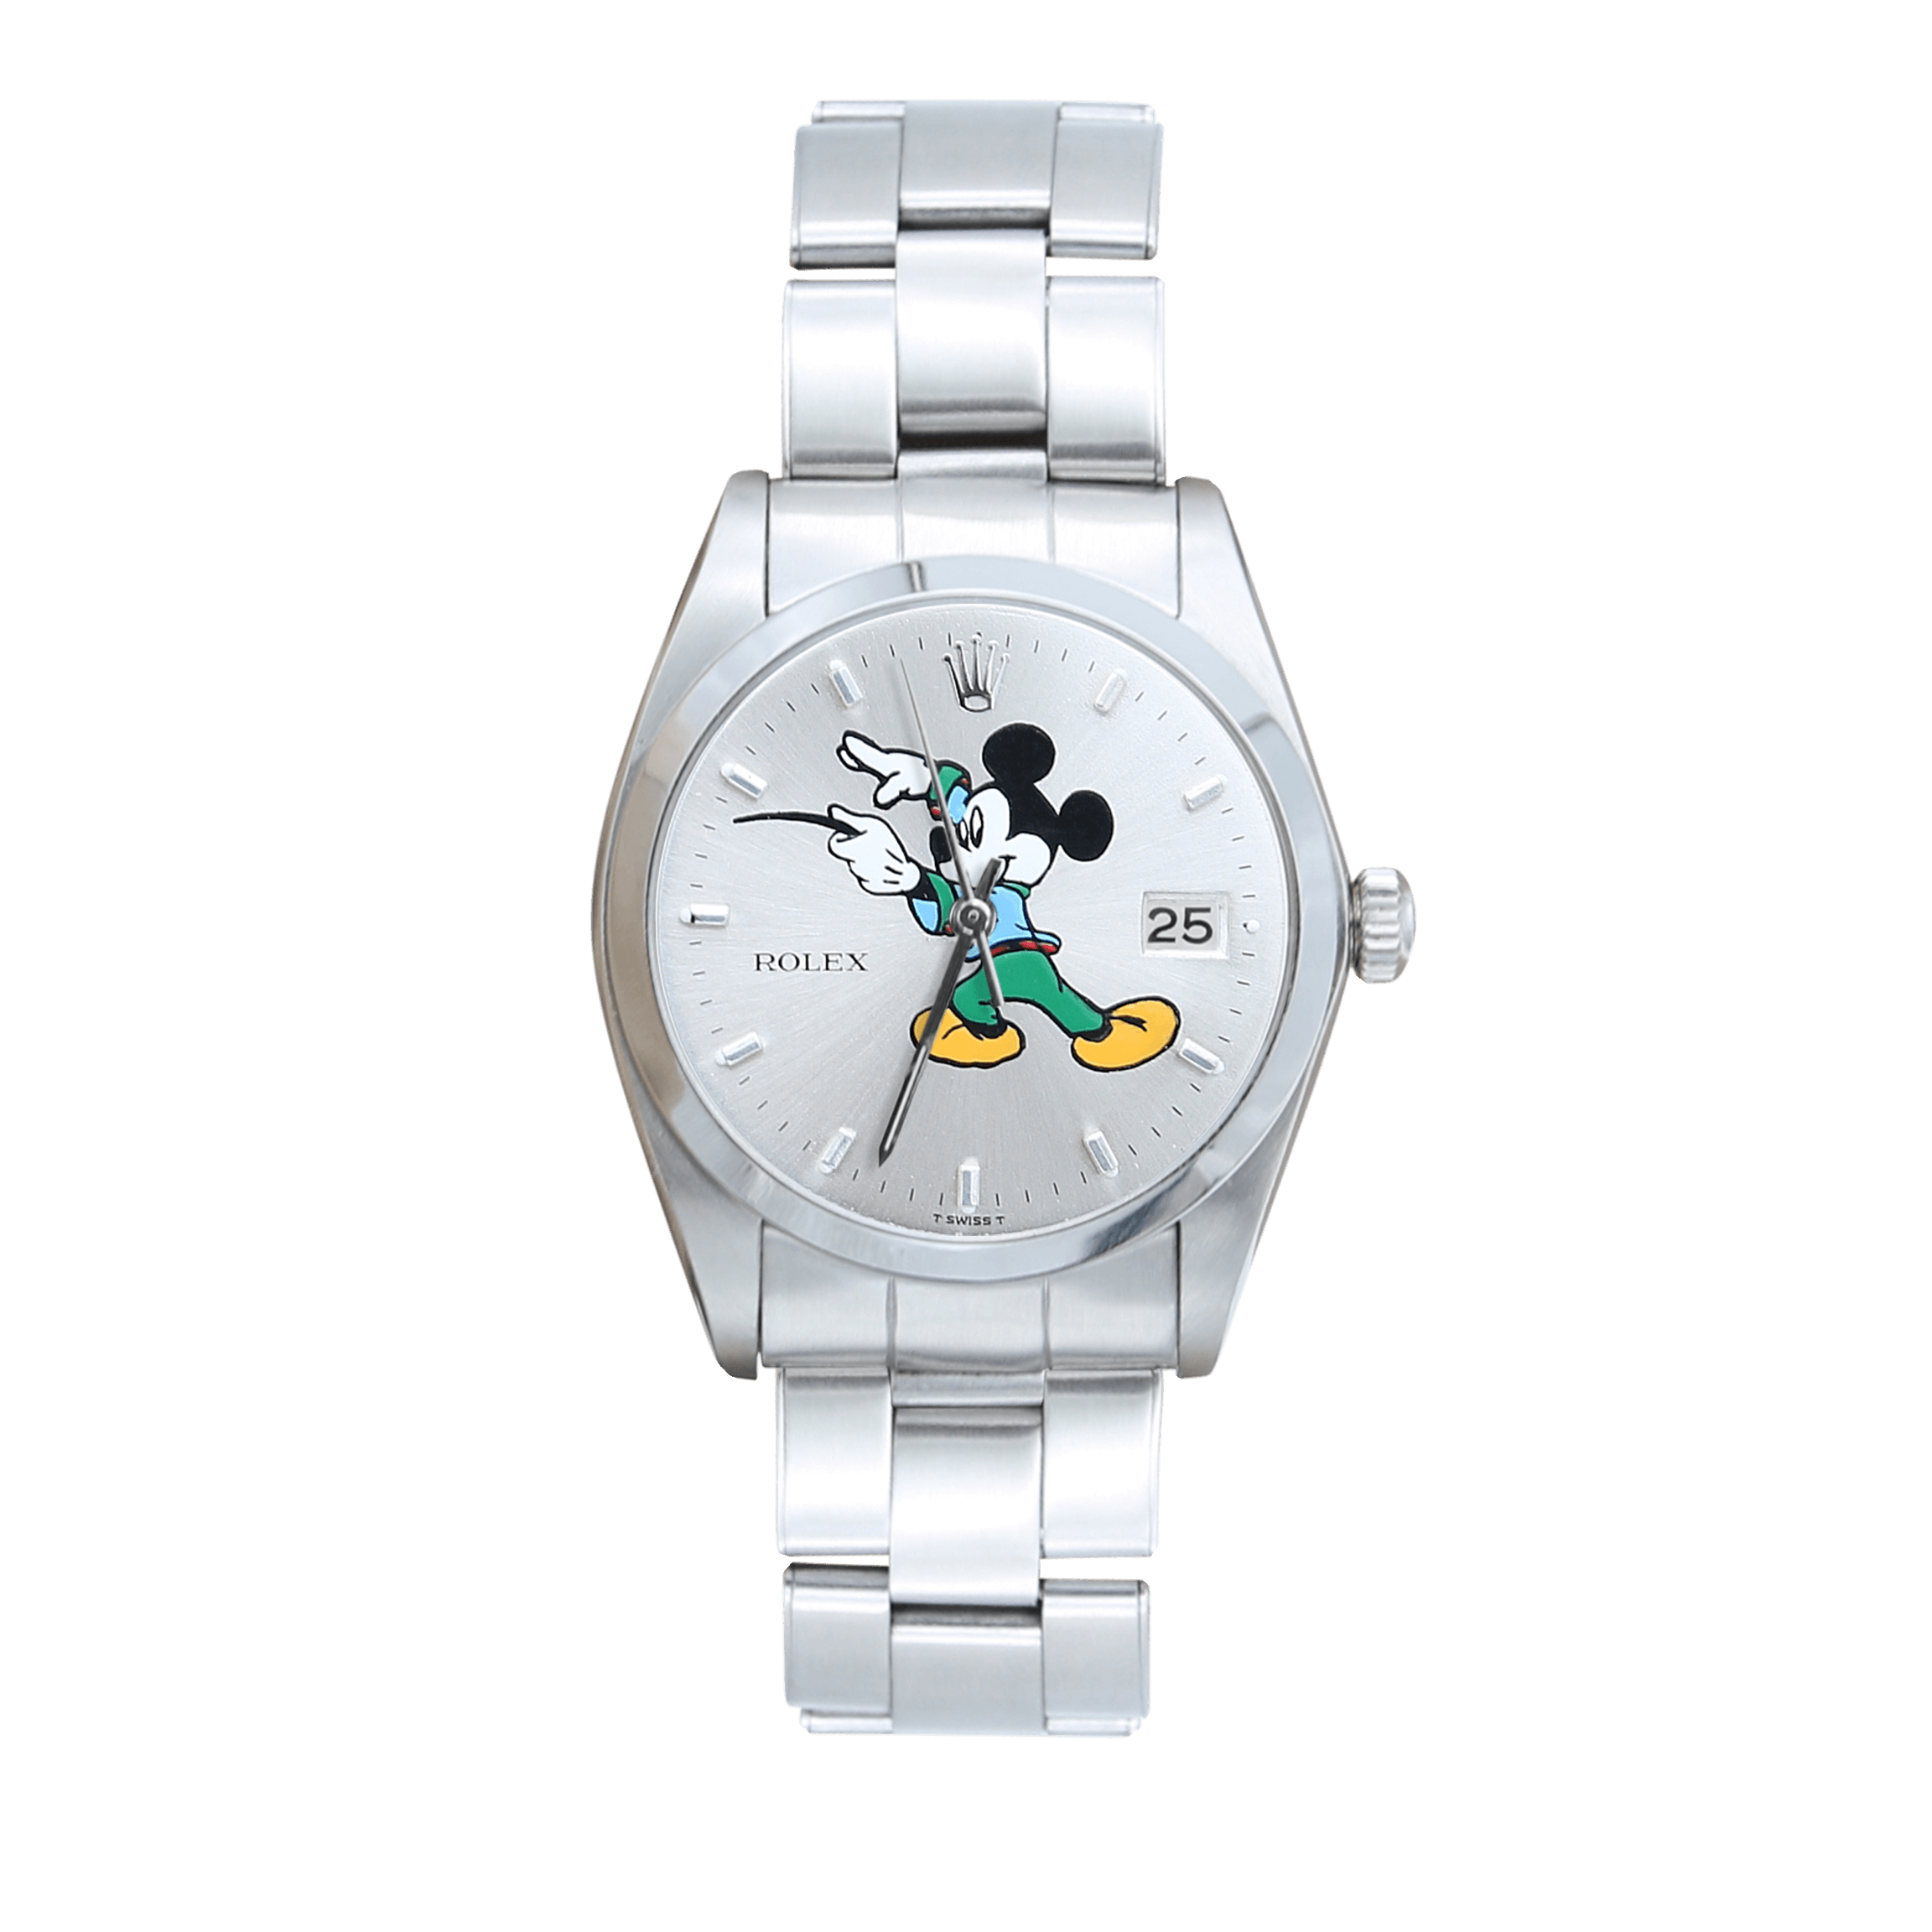 Rolex Precision Date ref 6694 Mickey Mouse Musician Silver Dial Oyster Bracelet